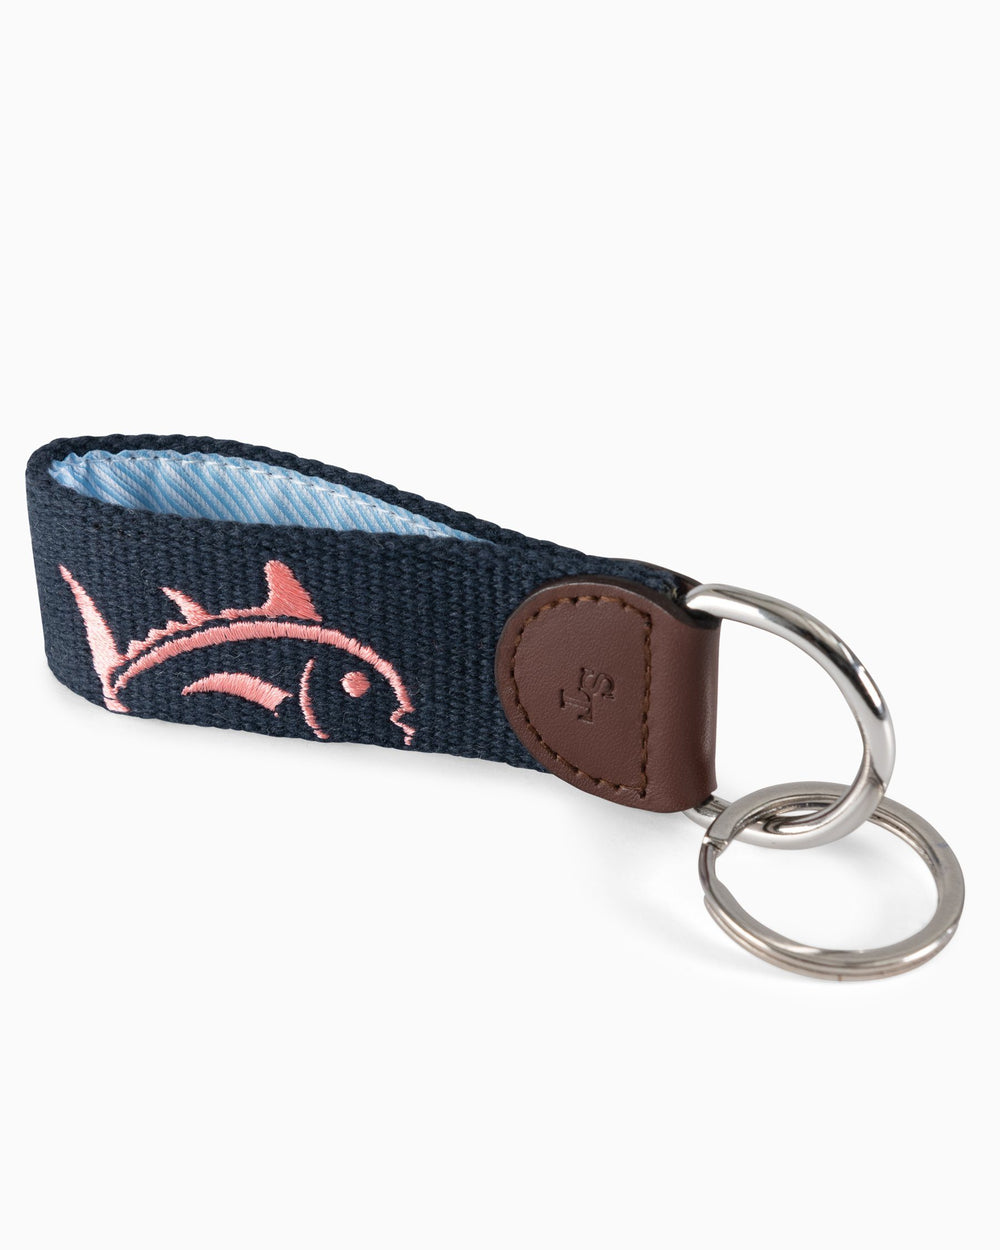 The detail of the Southern Tide Skipjack Embroidered Key Fob by Southern Tide - Sunset Coral